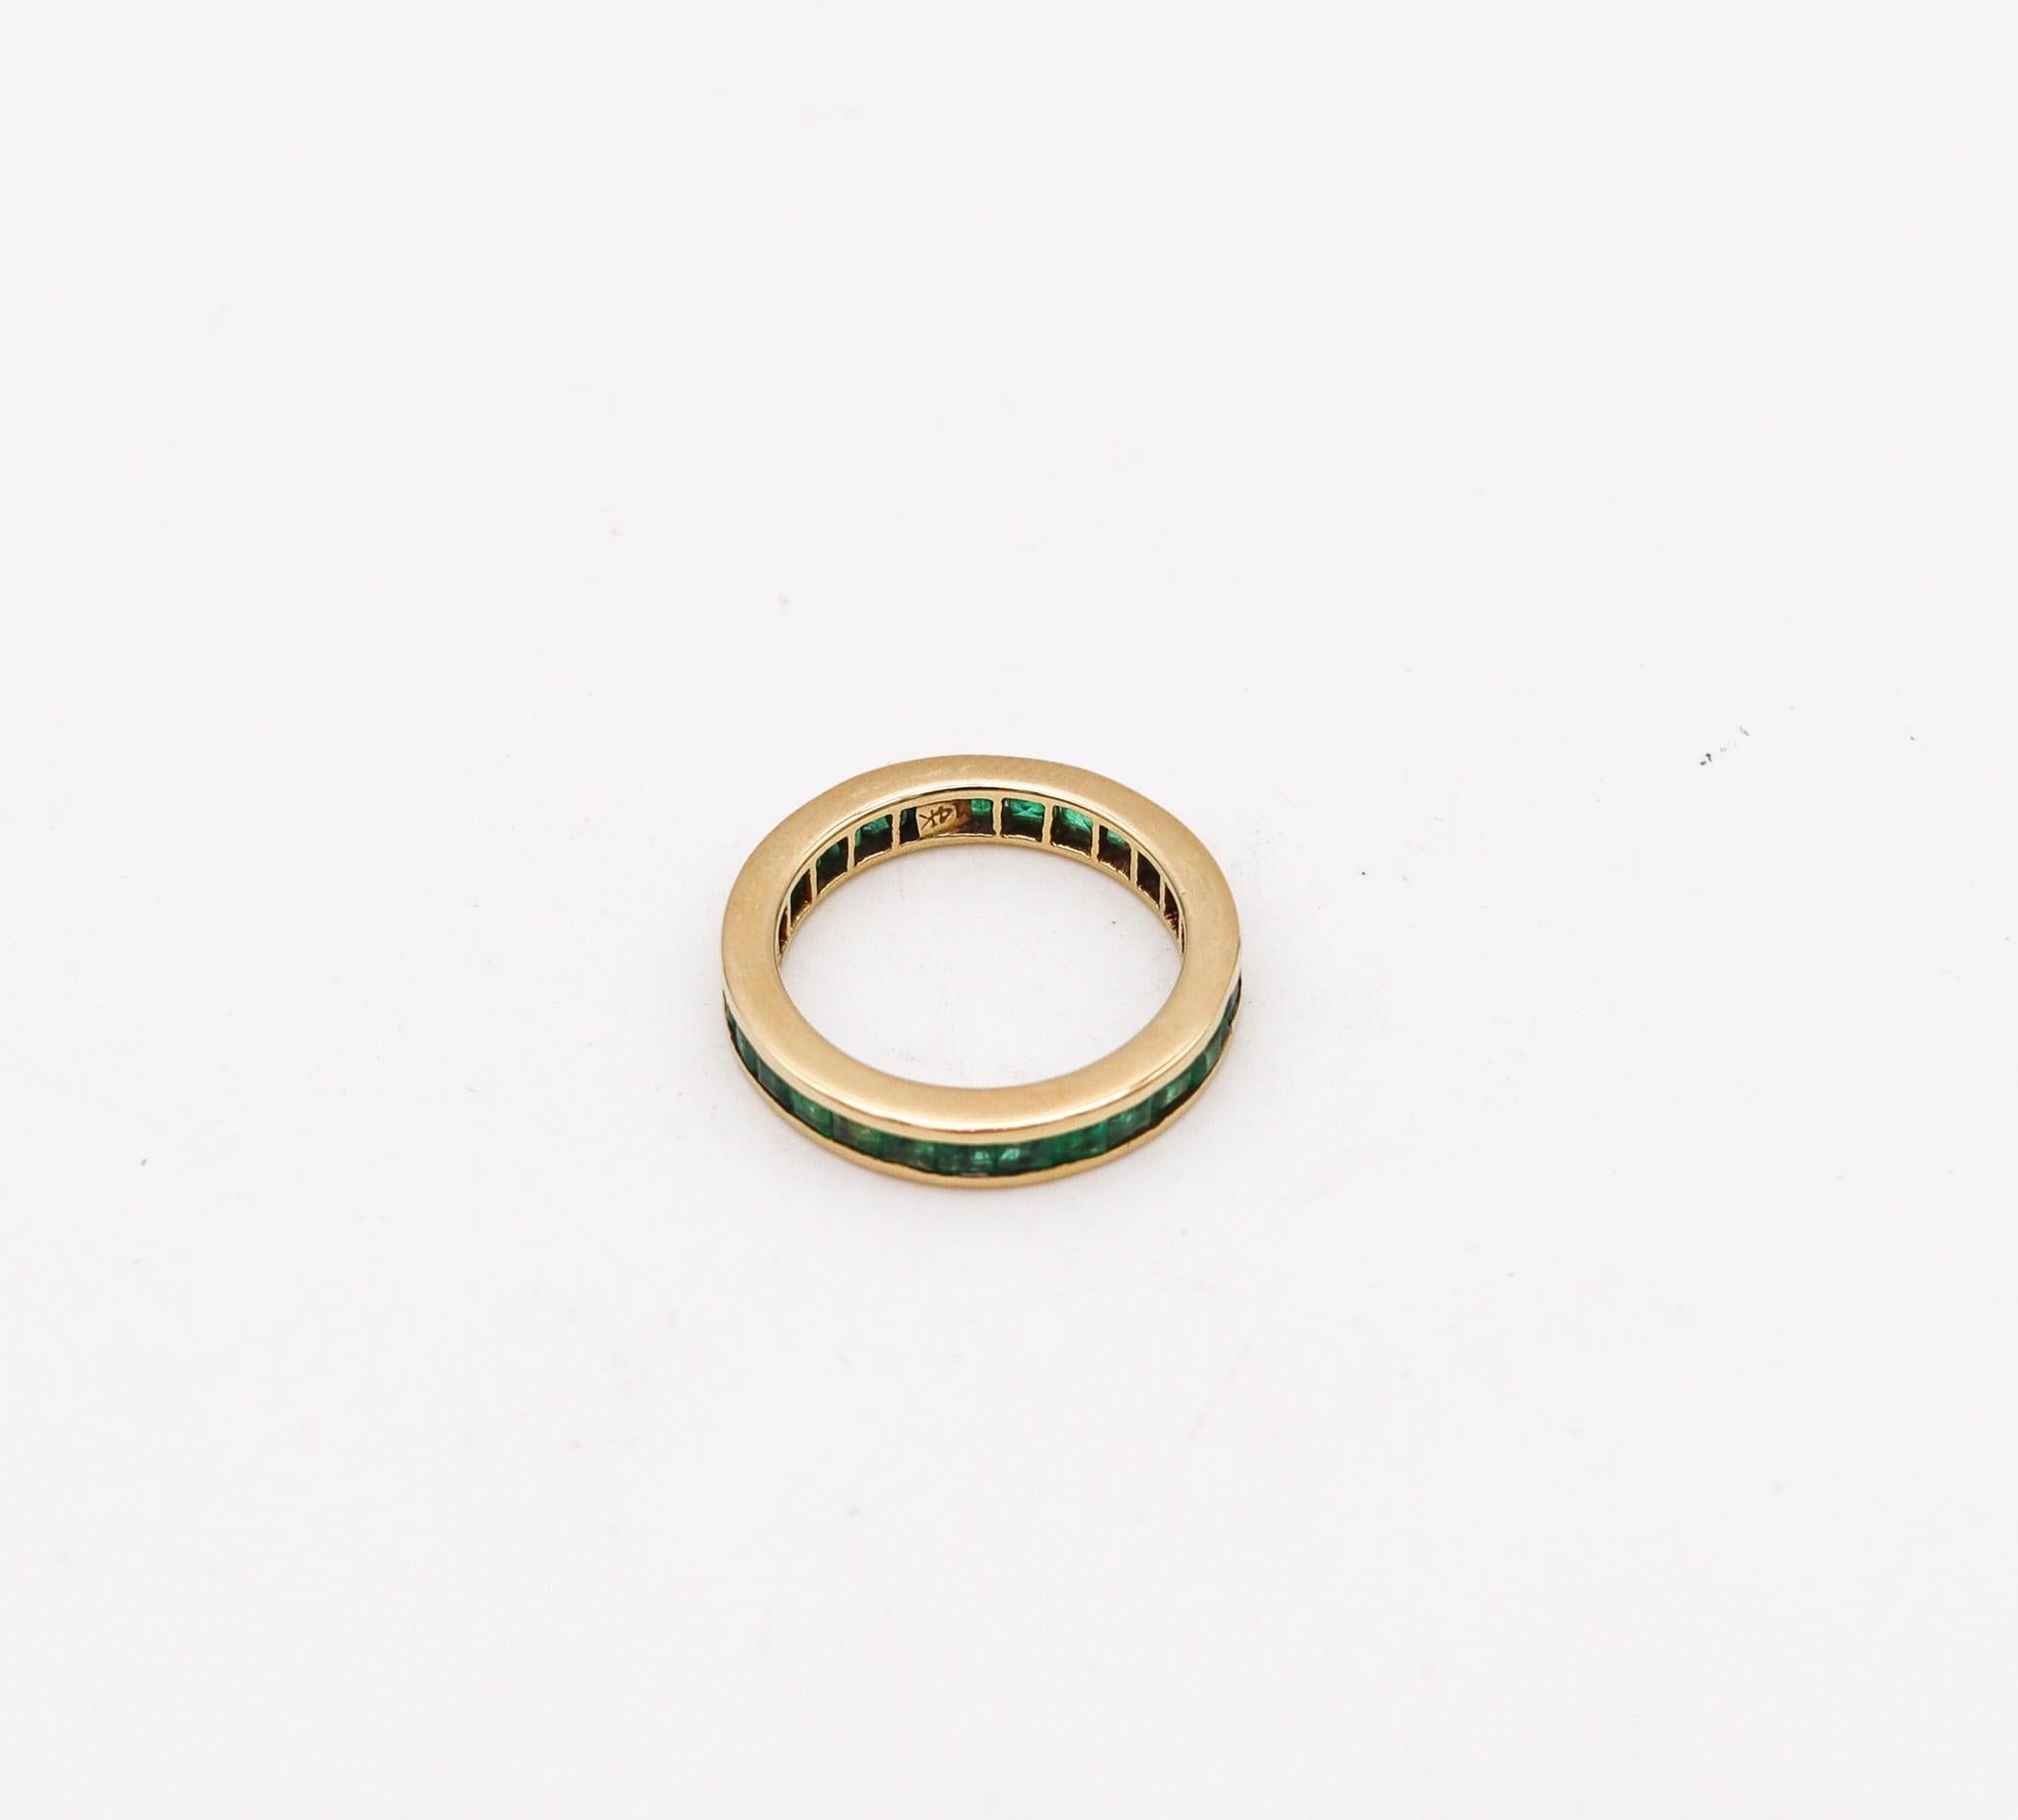 Modernist Italian Eternity Ring Band In 14 Kt Yellow Gold With 2.10 Ctw In Vivid Emeralds For Sale